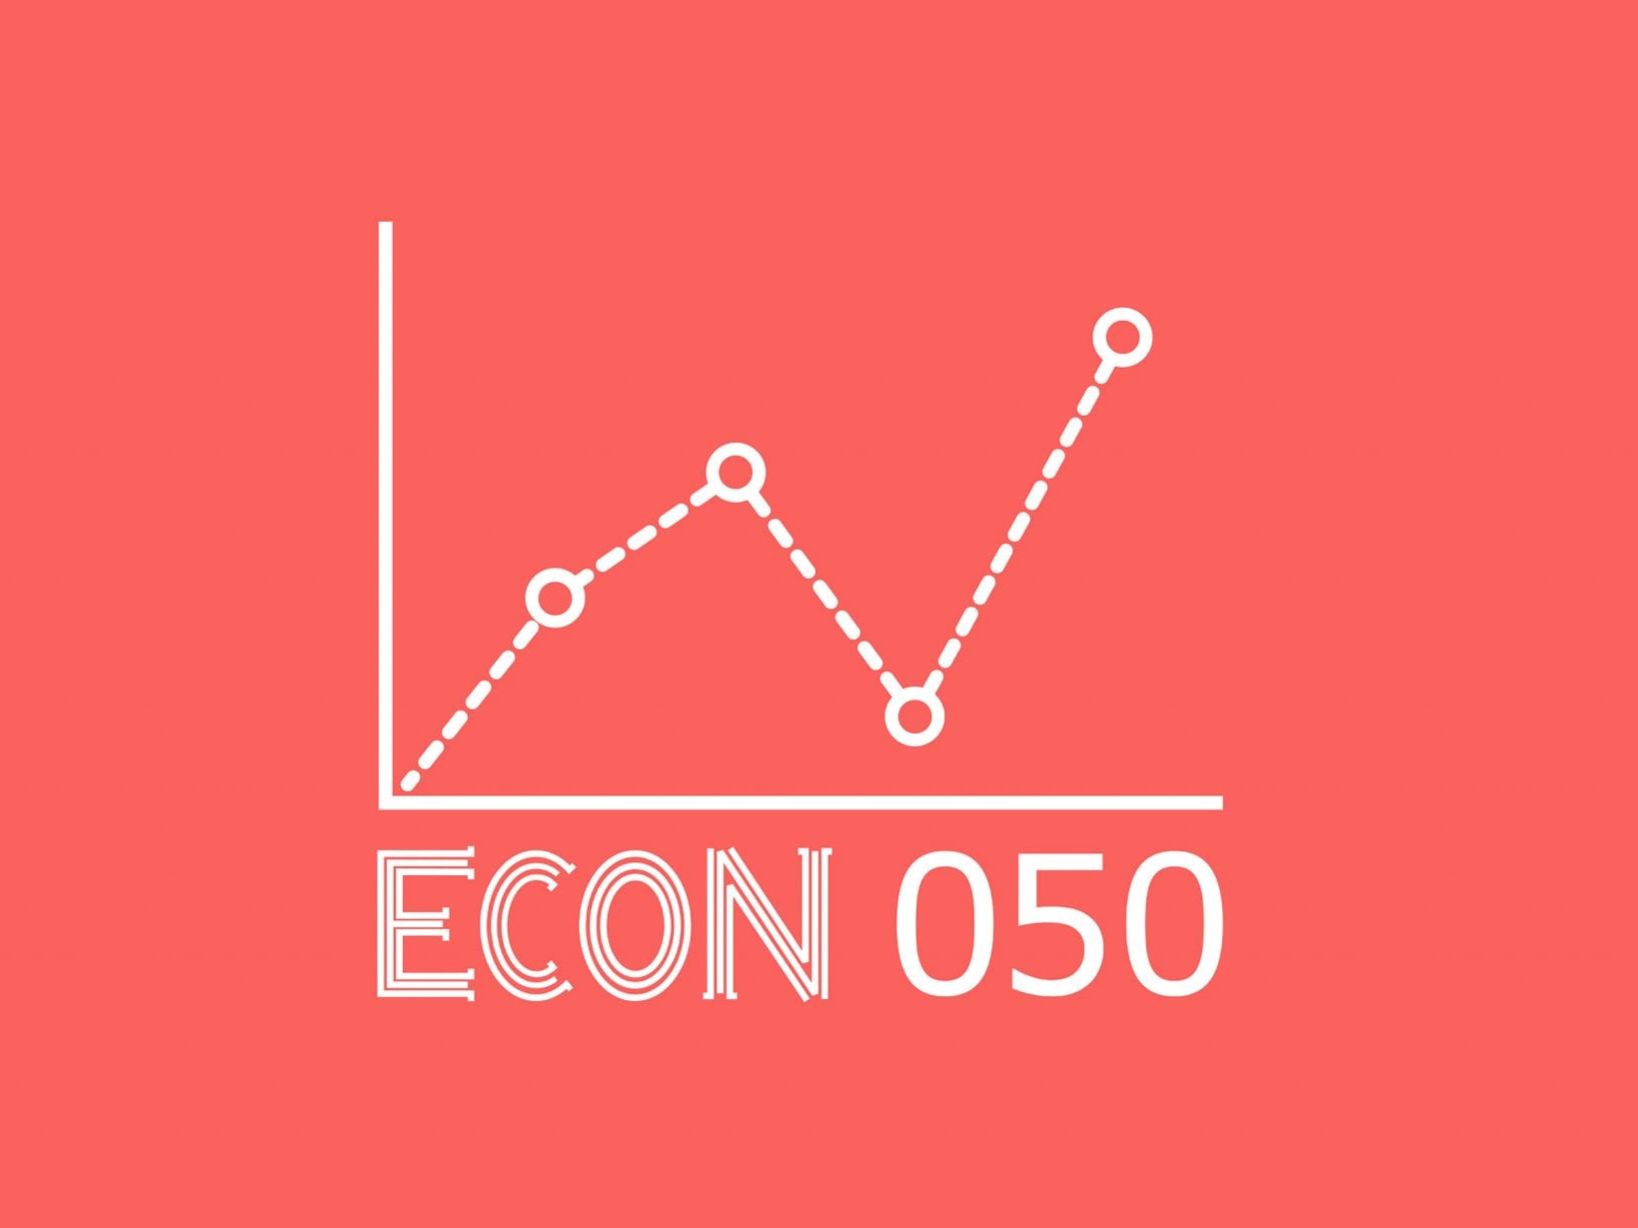 Podcast Econ 050 covers the economics and business news that matters to the Netherlands and the wider world.